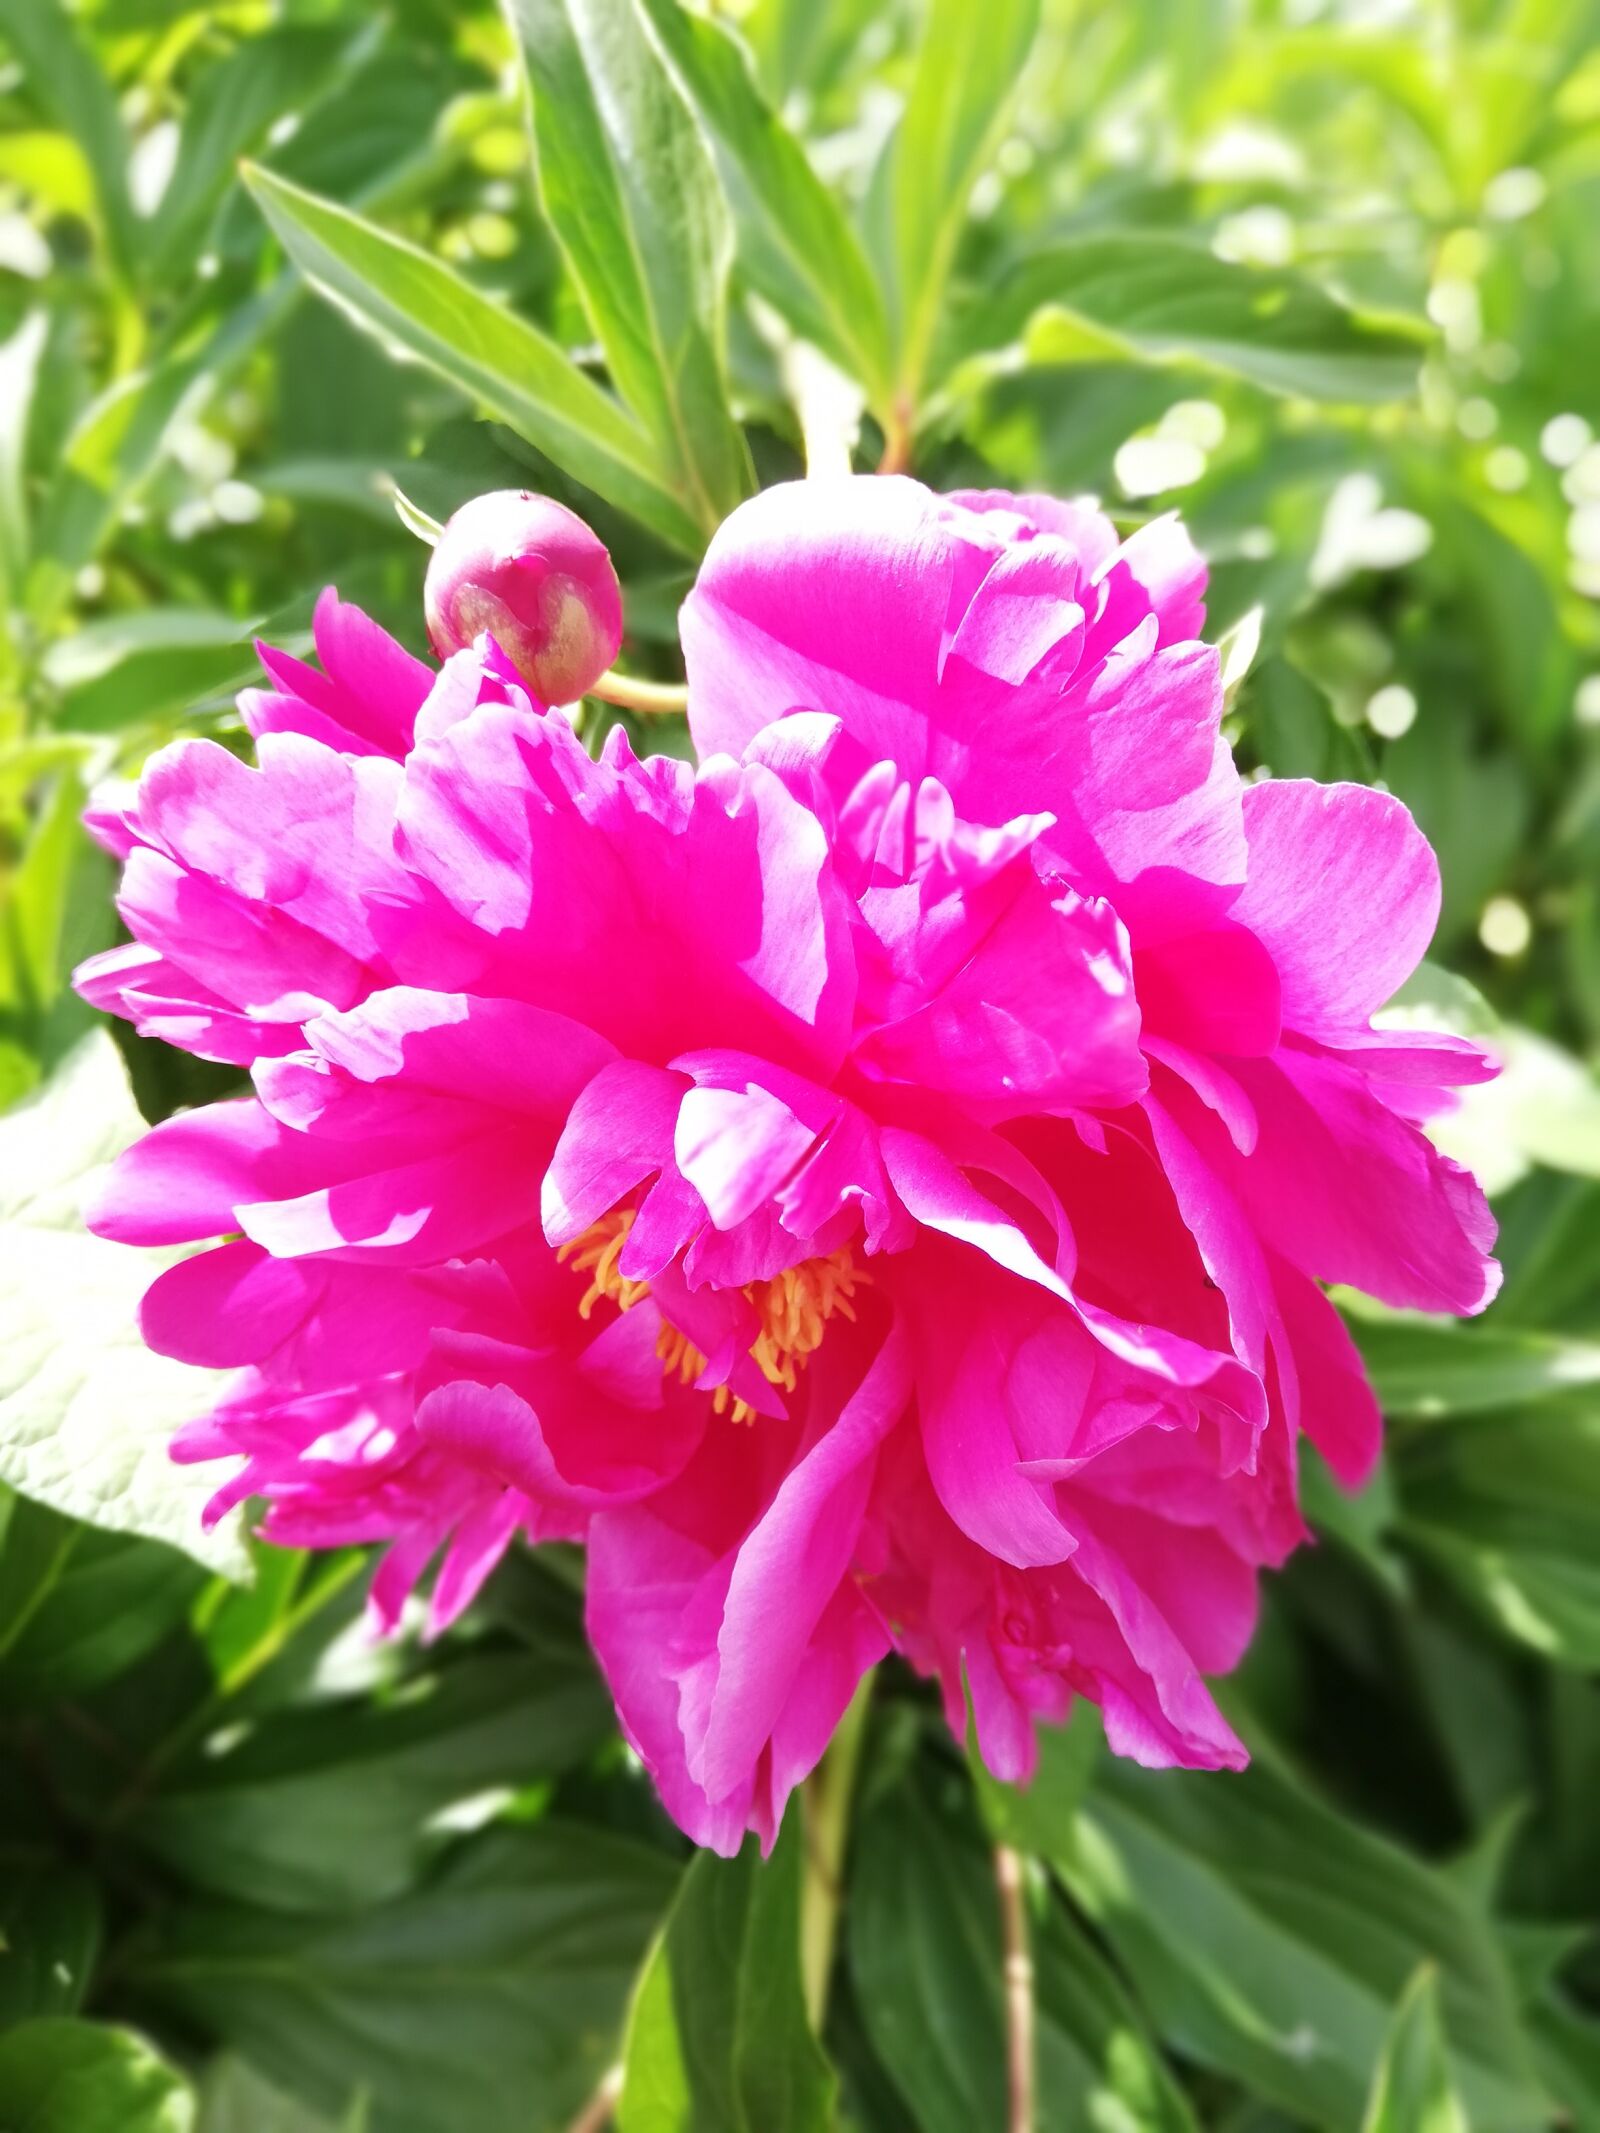 HUAWEI P20 lite sample photo. Flower, pink, day photography